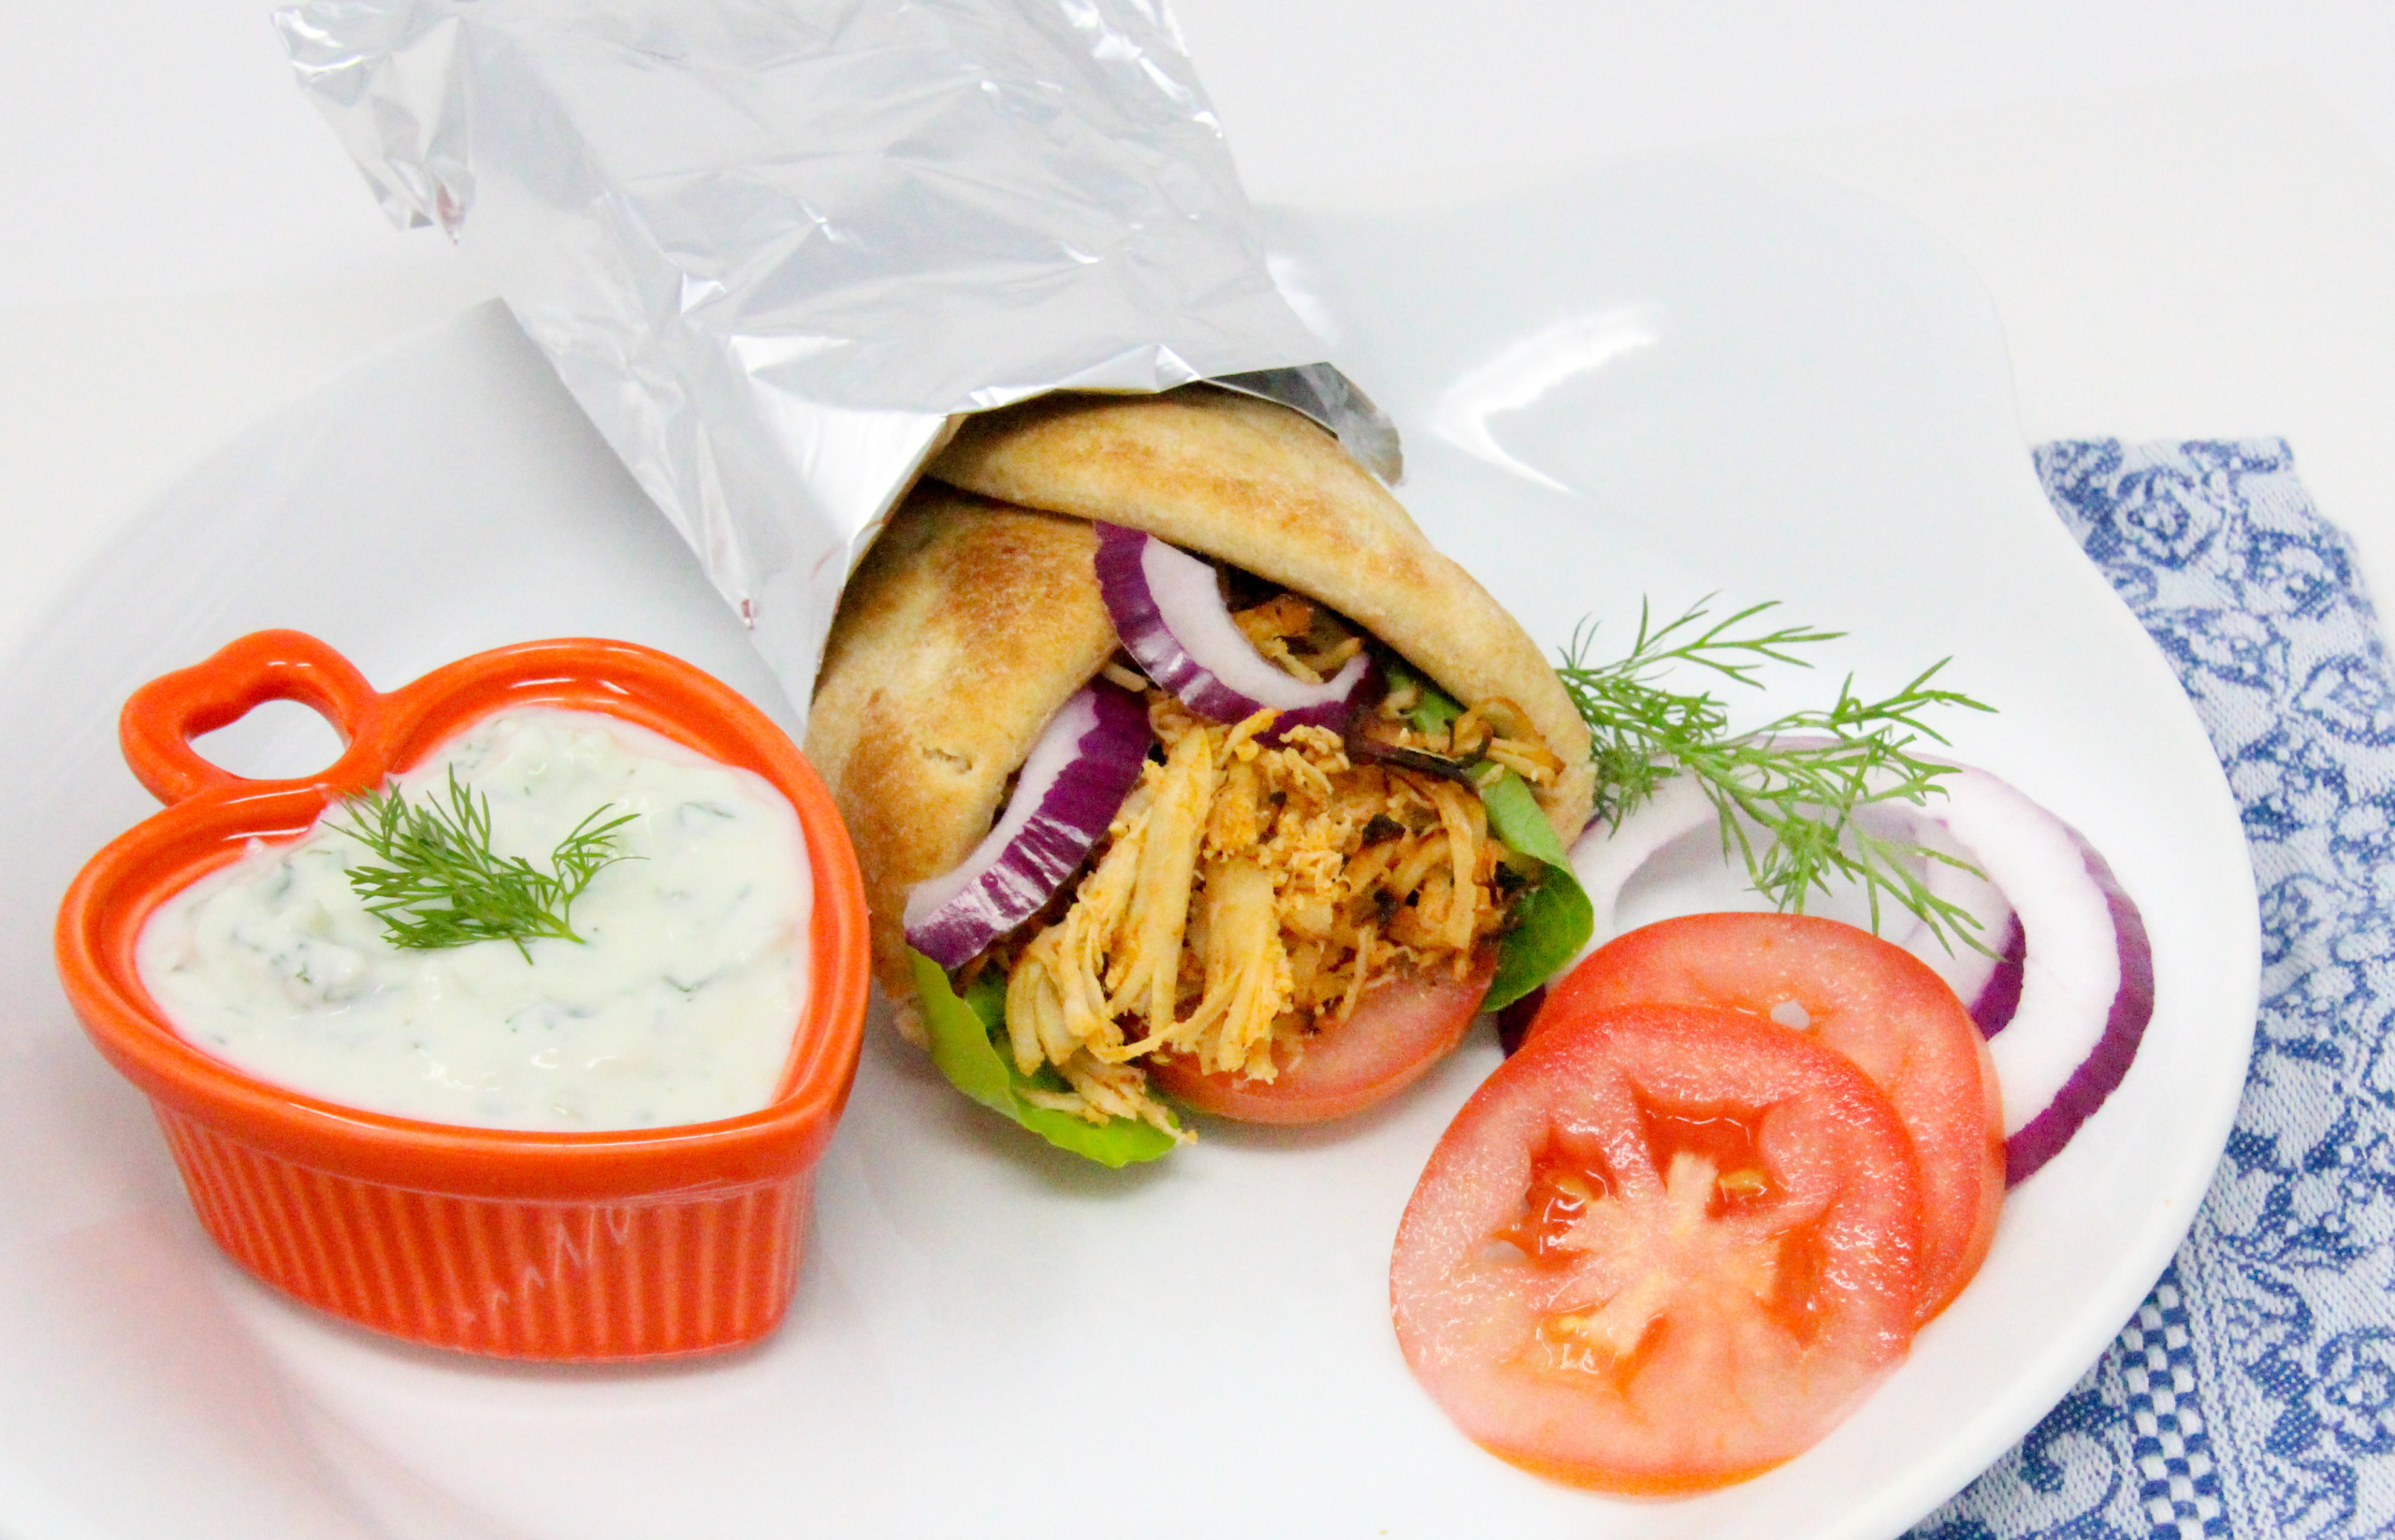 Chicken Gyros with Tzatziki Sauce uses pre-cooked chicken breast which makes this meal comes together quickly. Recipe shared with permission granted by Lynn Cahoon, author of FIVE FURRY FAMILIARS.